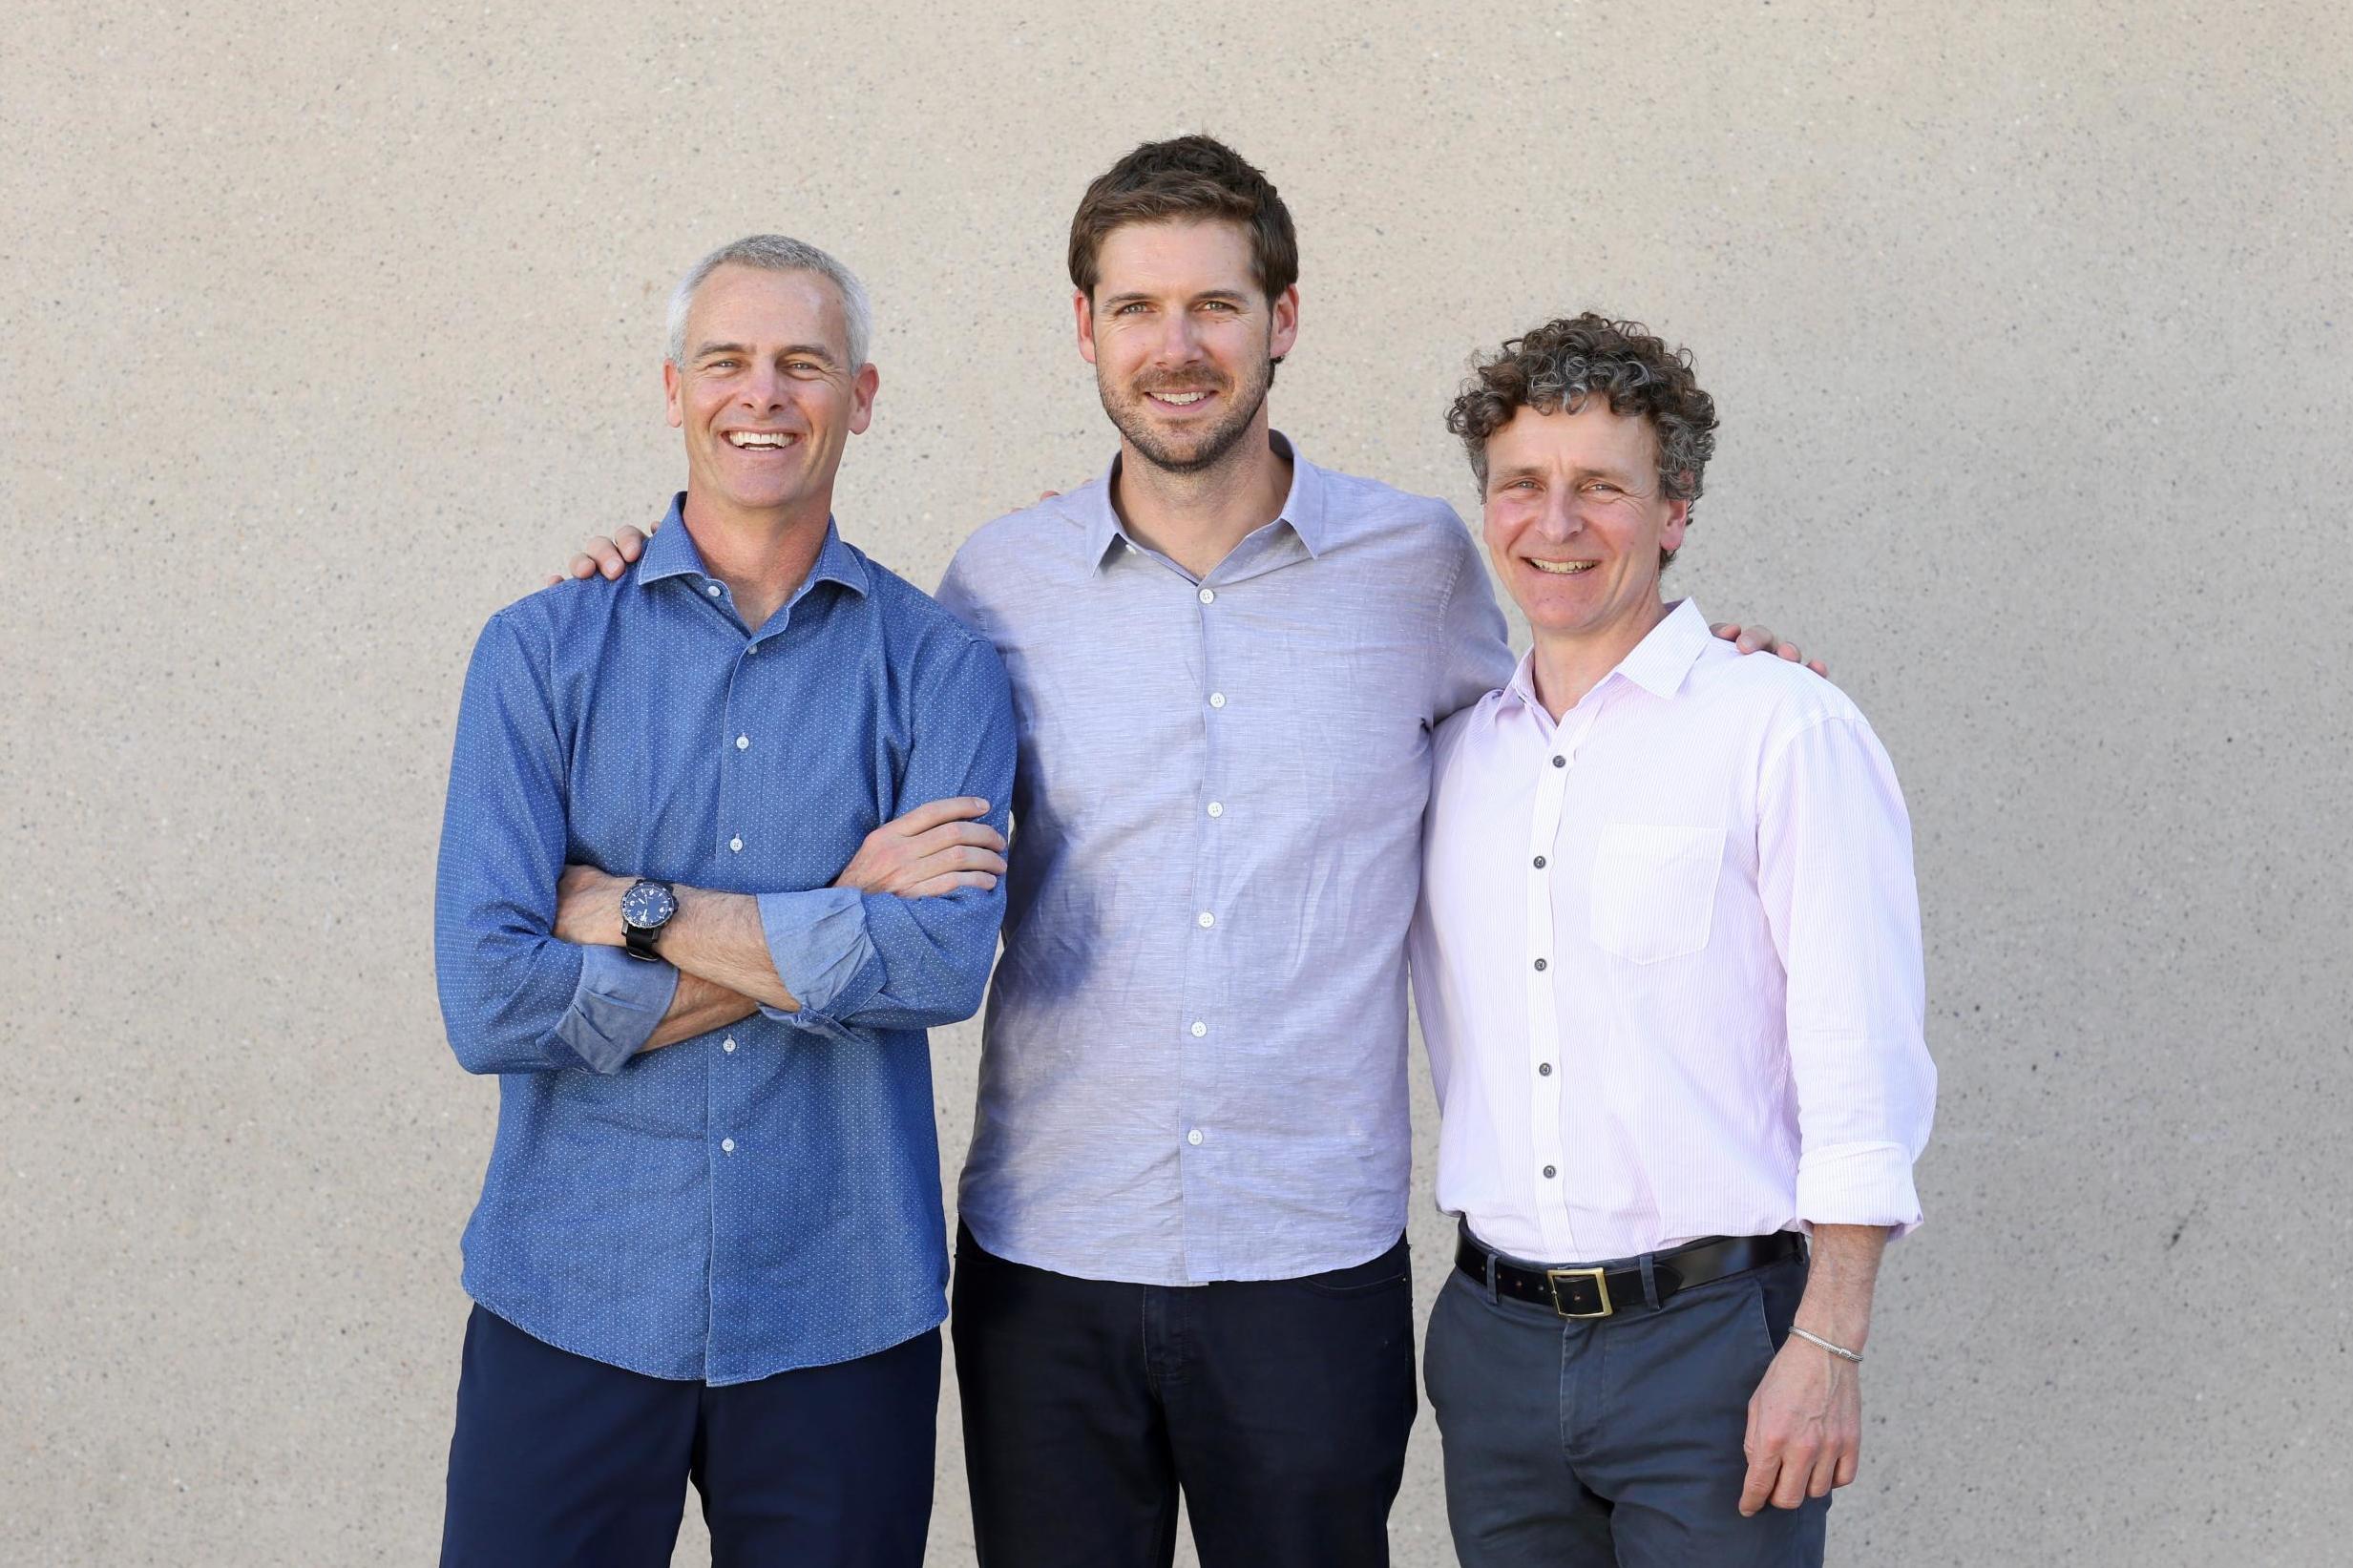 Strava's new CEO James Quarles (centre) alongside chairman and co-founder Mark Gainey (left) and board member and co-founder Michael Horvath (right)